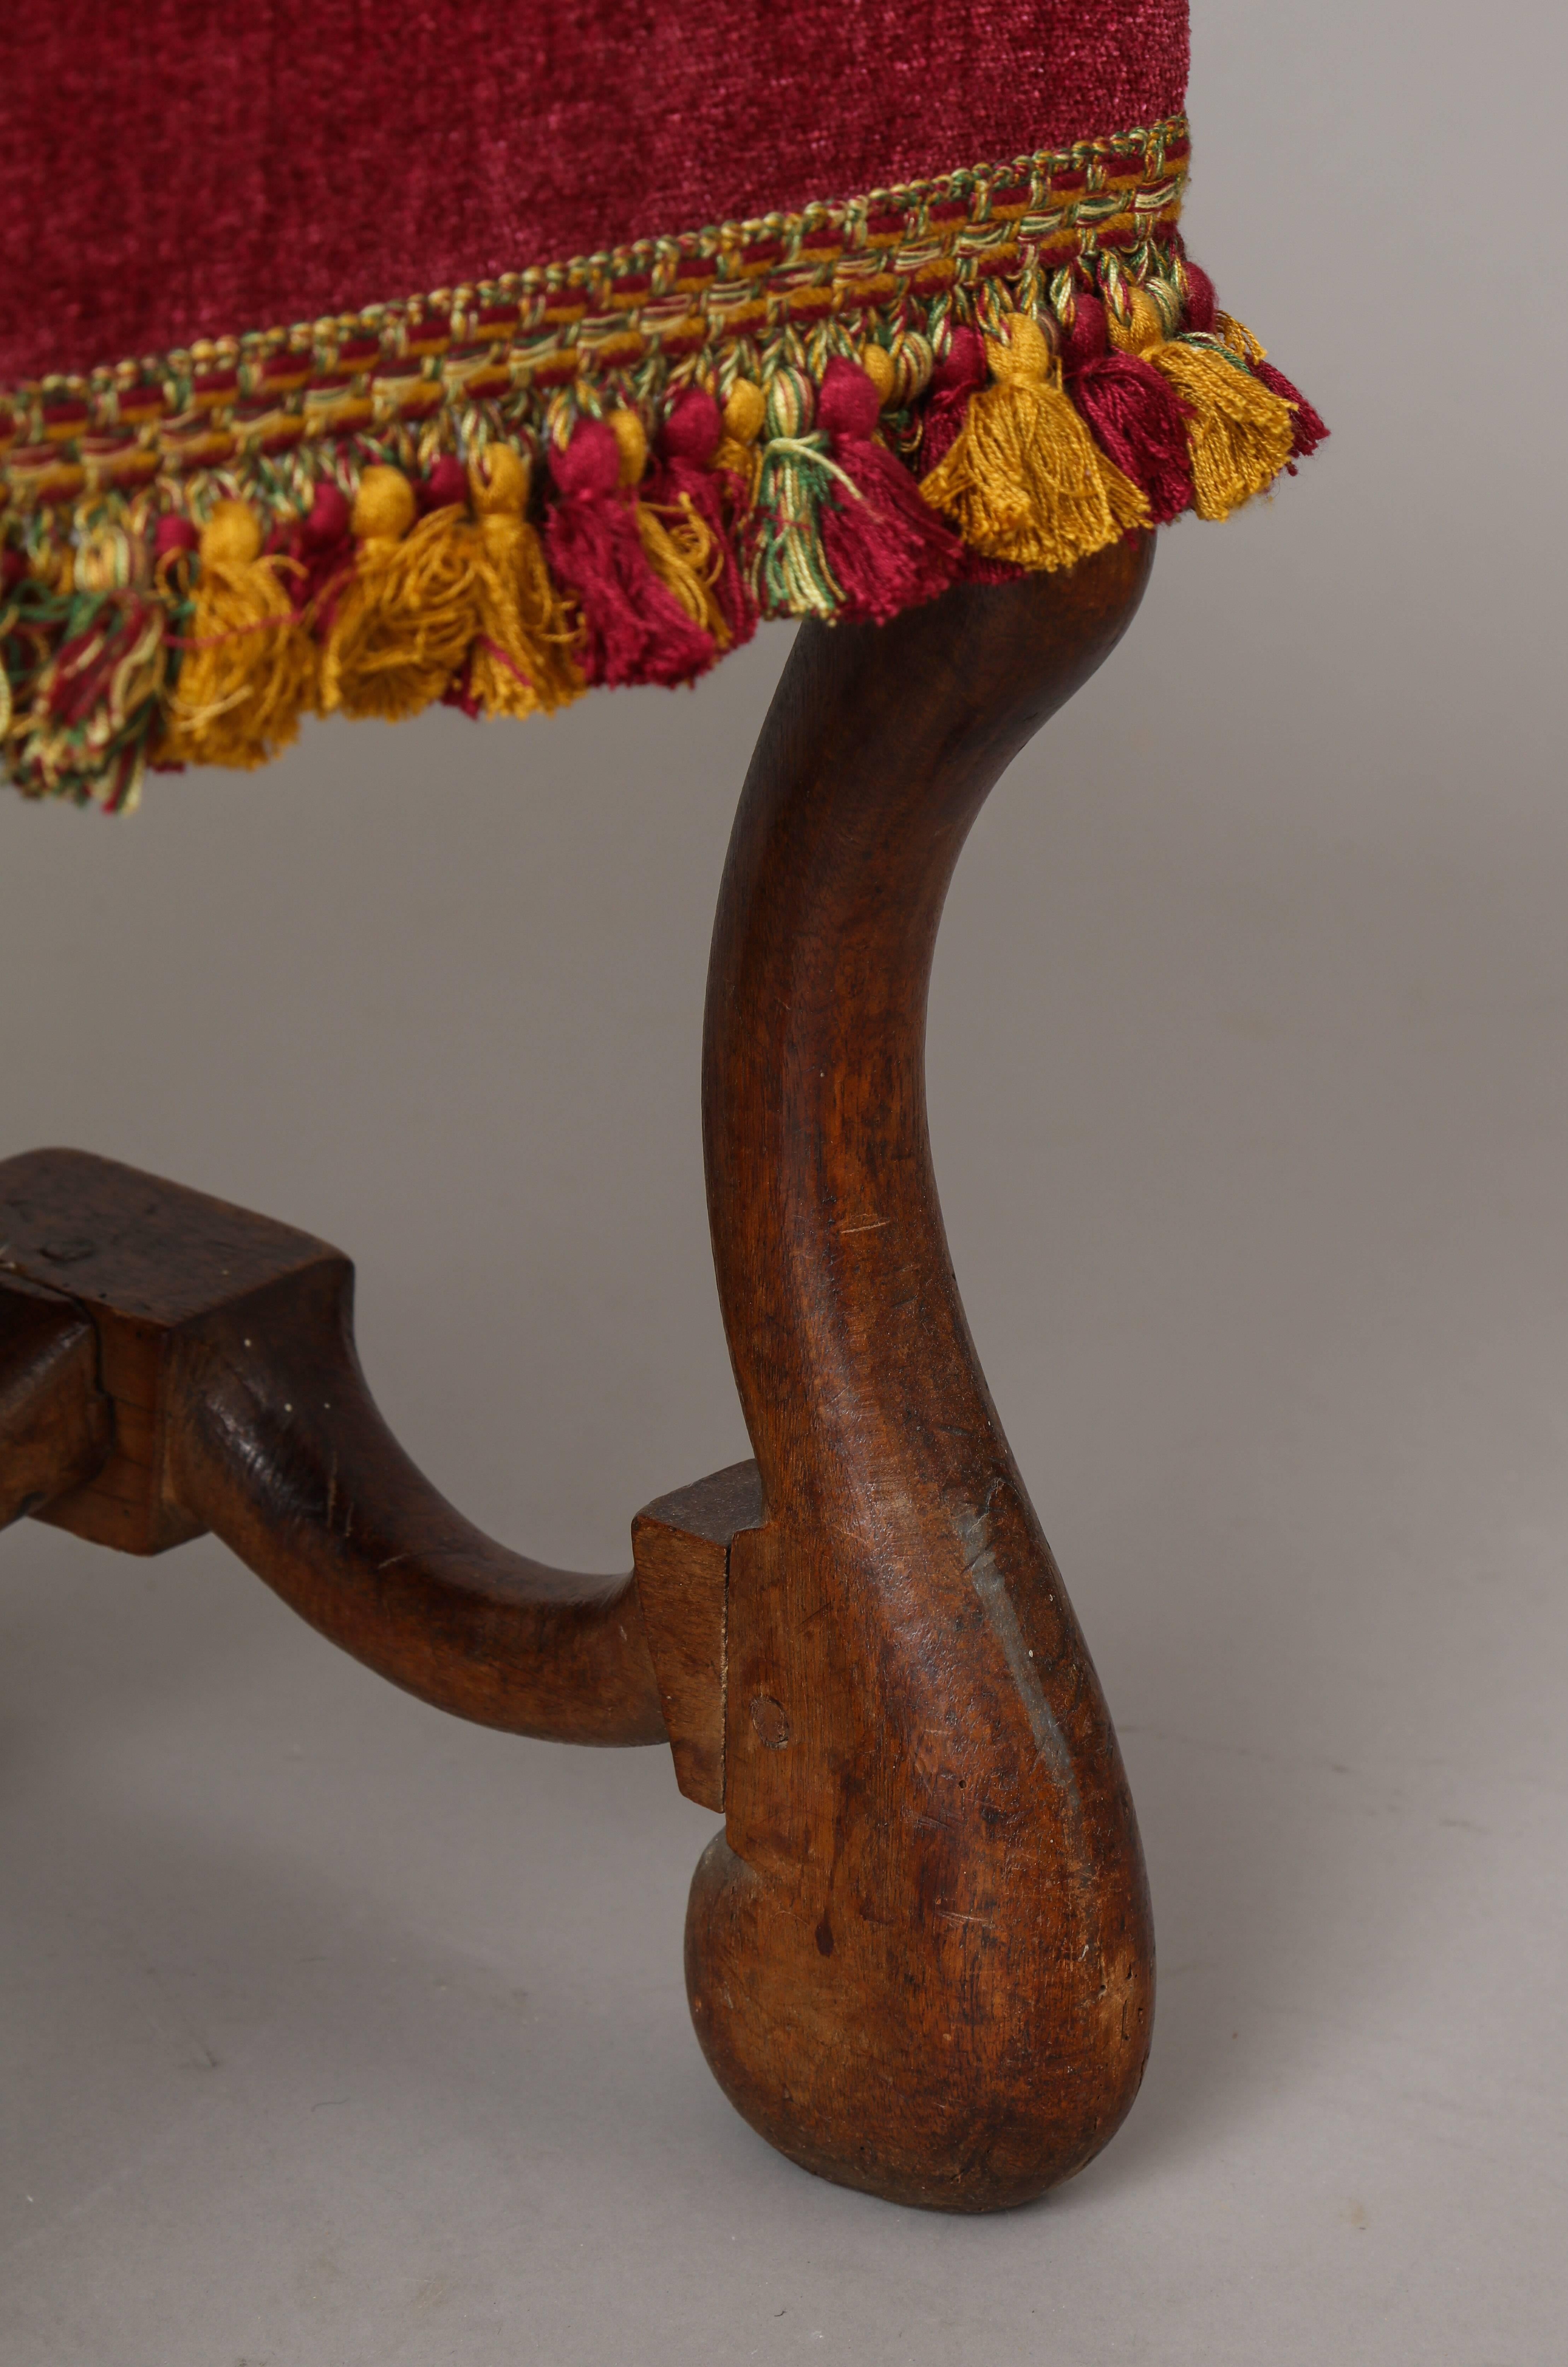 A Louis XIII period walnut bench/stool with ‘Os de mouton’ legs and a conforming stretcher, upholstered in magenta velvet with ochre and magenta silk tassels.
France, 17th century.
    
    